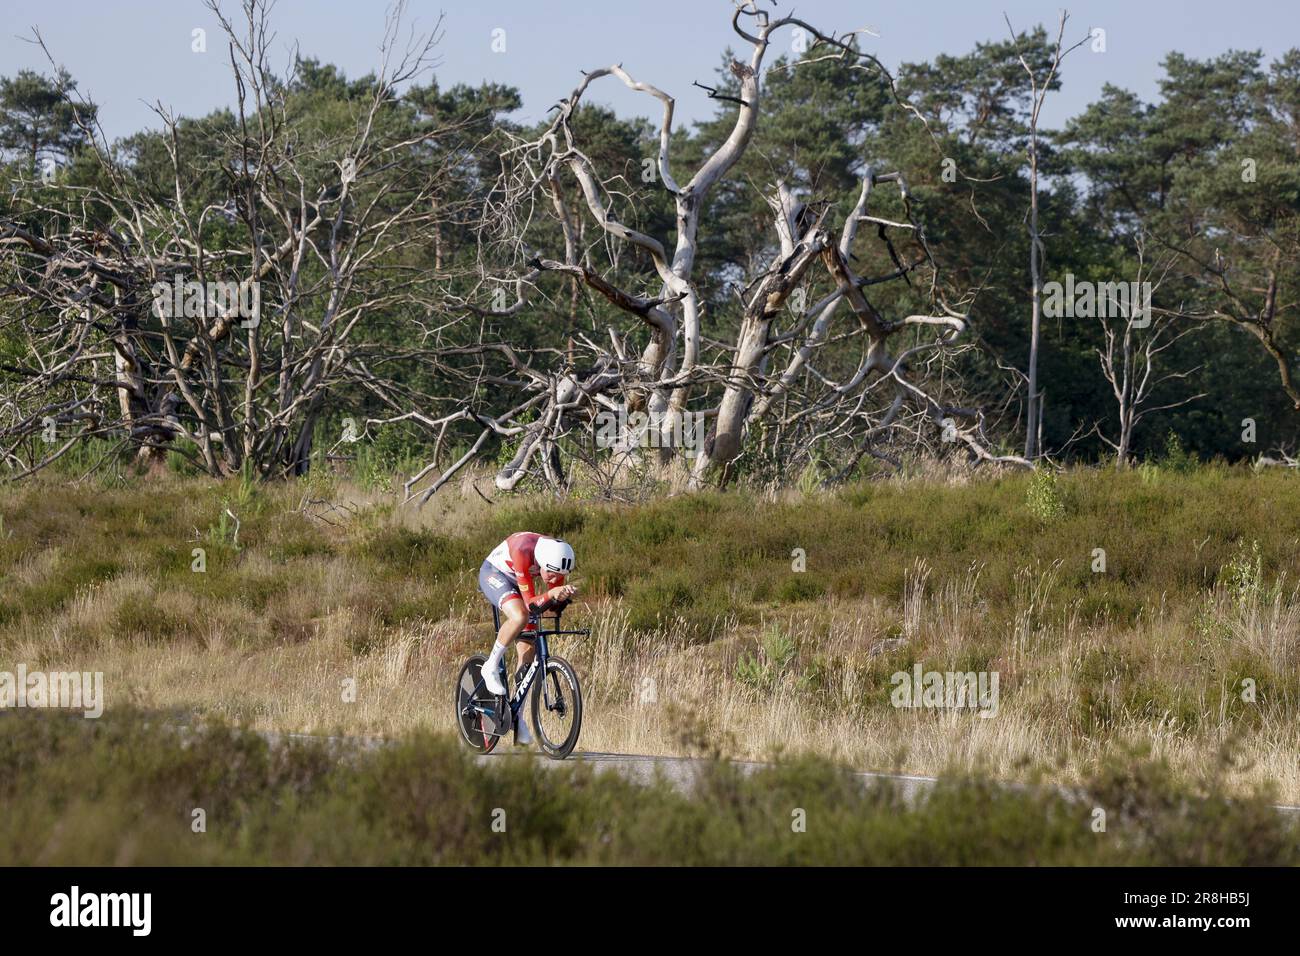 ELSPEET - Cyclist Daan Hoole during the Dutch time trial championship. The riders rode two laps of approximately 20 kilometers between the meadows and forest paths of the Veluwe. ANP BAS CZERWINSKI netherlands out - belgium out Stock Photo